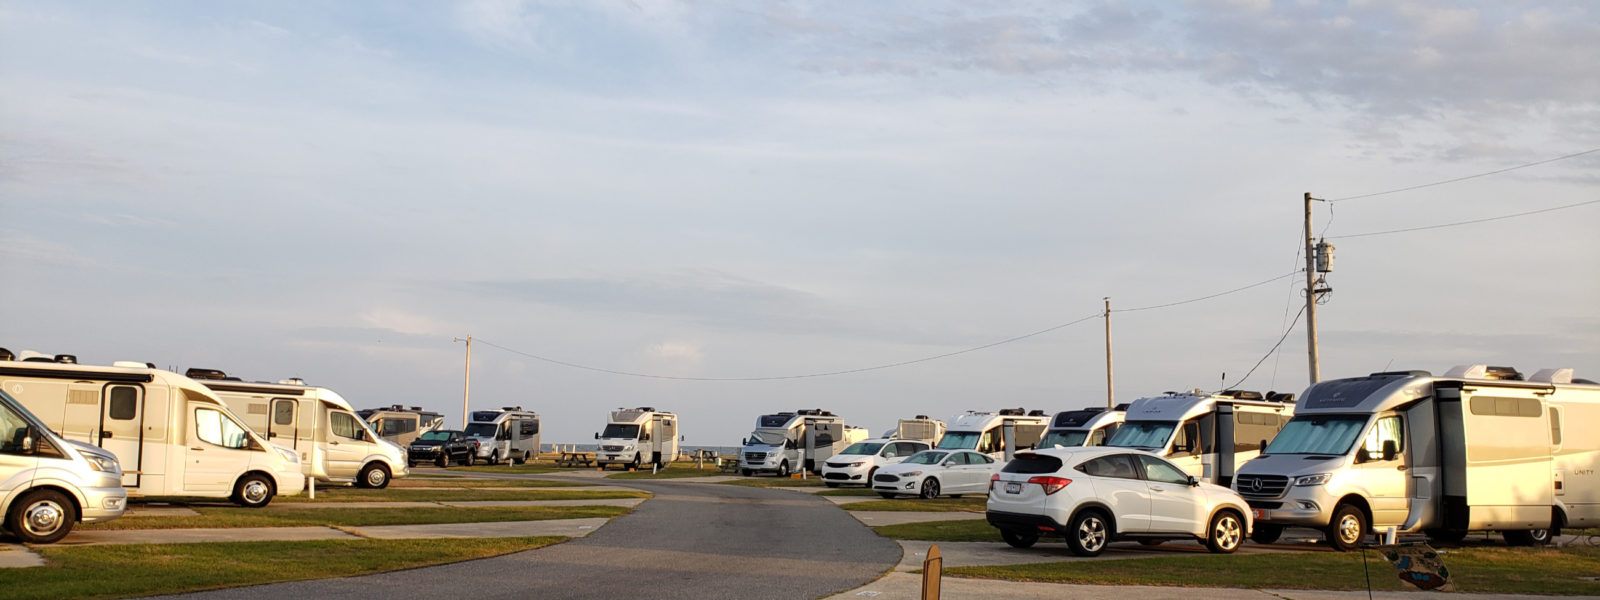 Fifty LTV RVs at Cape Hatteras